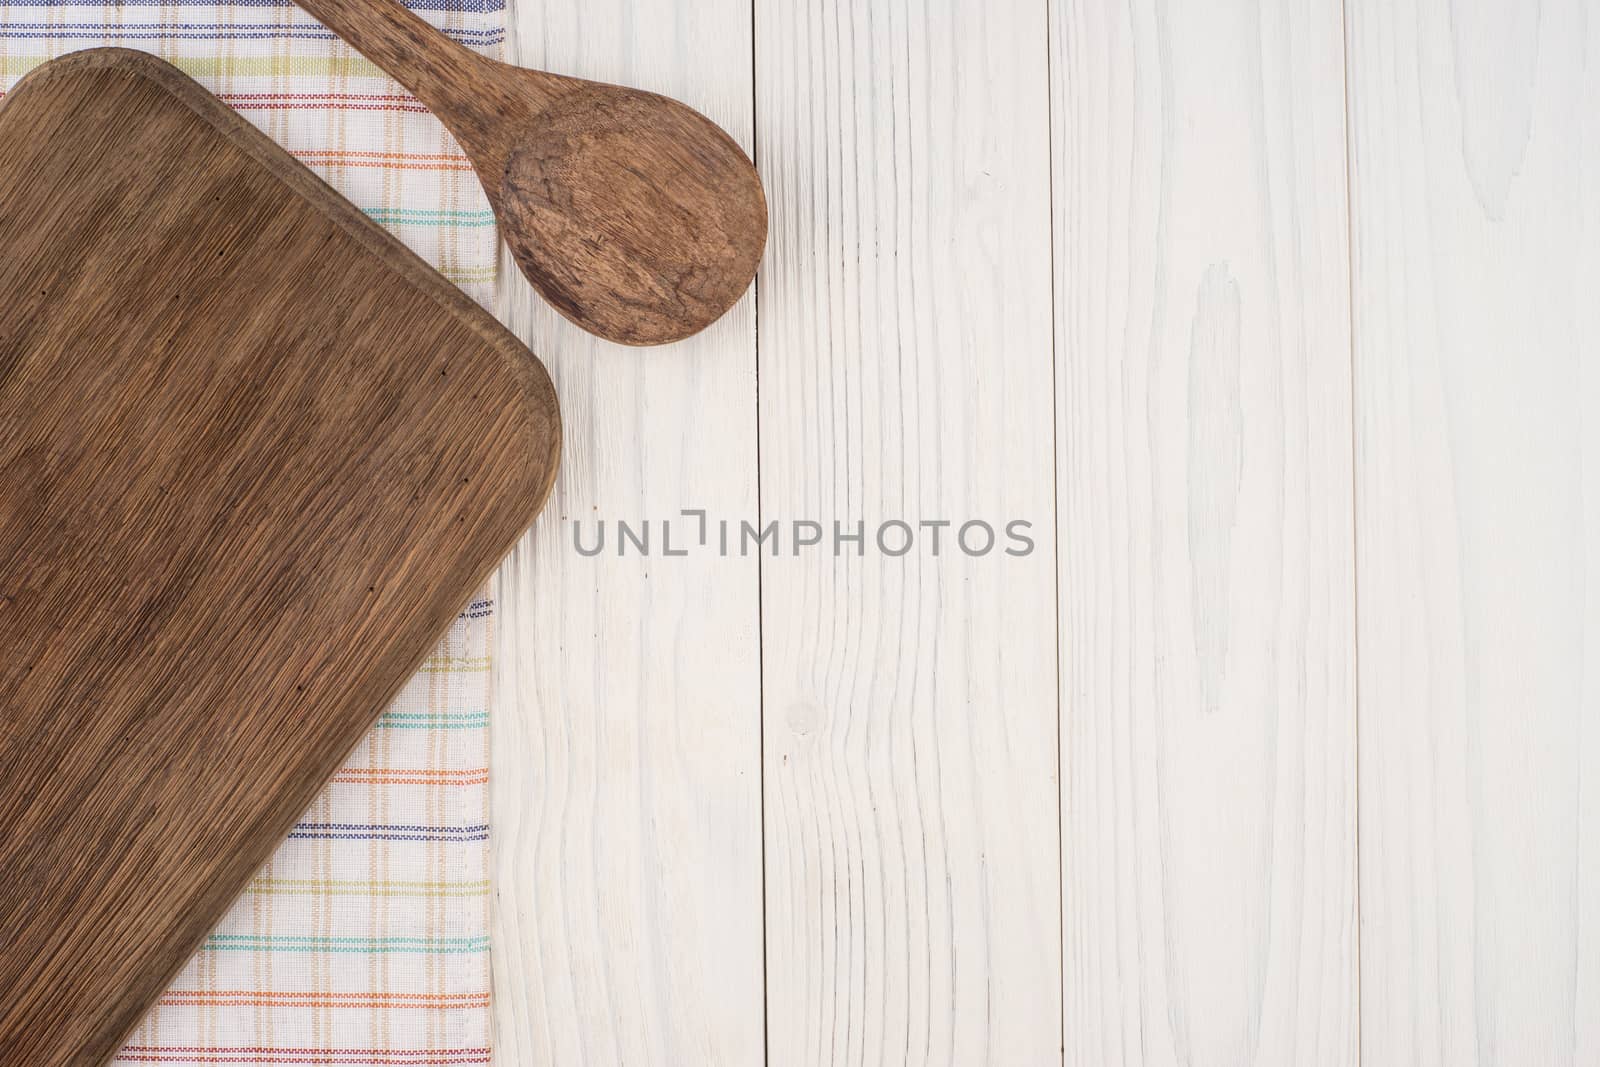 Cutting board and a spoon on a kitchen napkin on old wooden table. Top view.